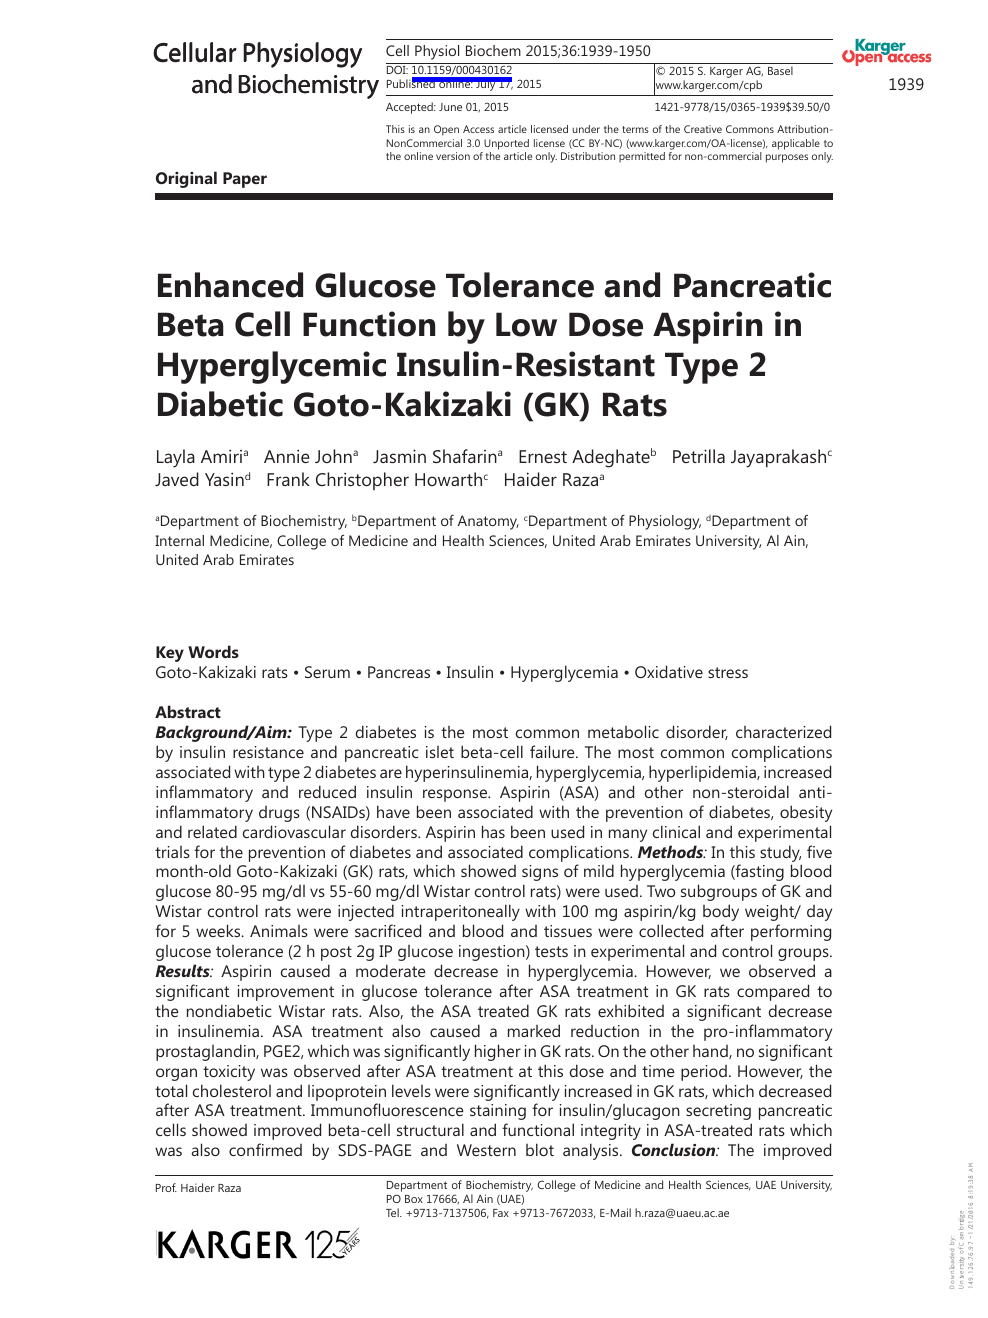 Enhanced Glucose Tolerance And Pancreatic Beta Cell Function By Low Dose Aspirin In Hyperglycemic Insulin Resistant Type 2 Diabetic Goto Kakizaki Gk Rats Topic Of Research Paper In Biological Sciences Download Scholarly Article